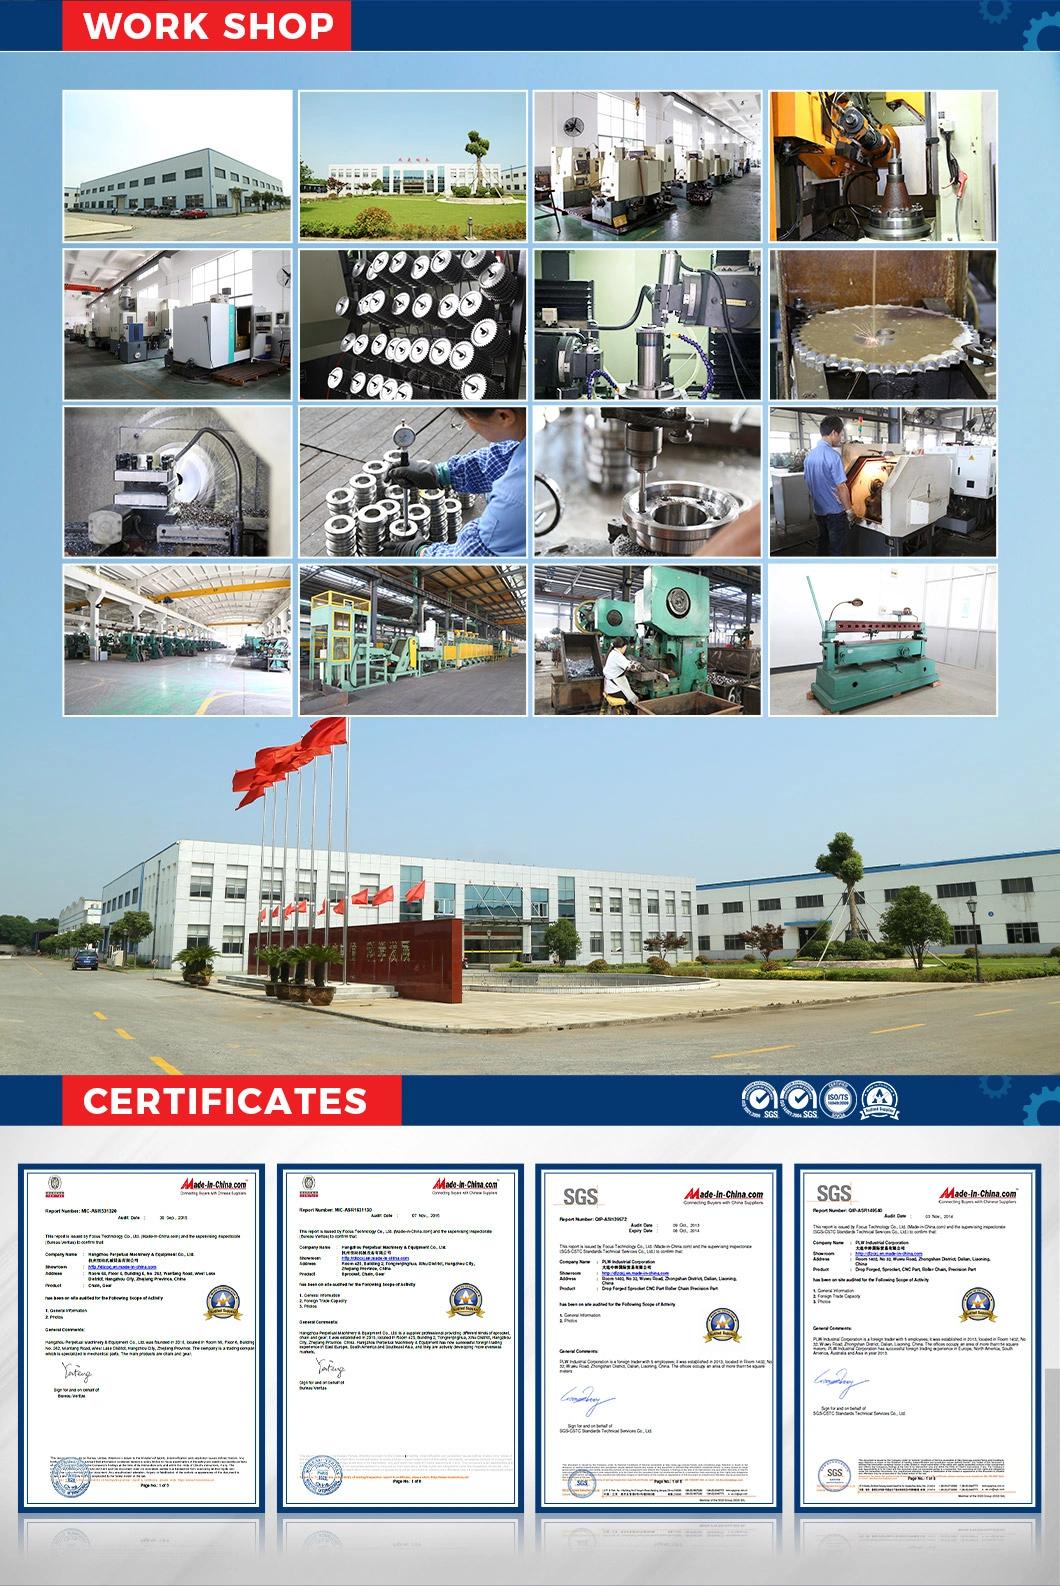 Machinery Engineering Industrial S Type Agricultural Conveyor Chain